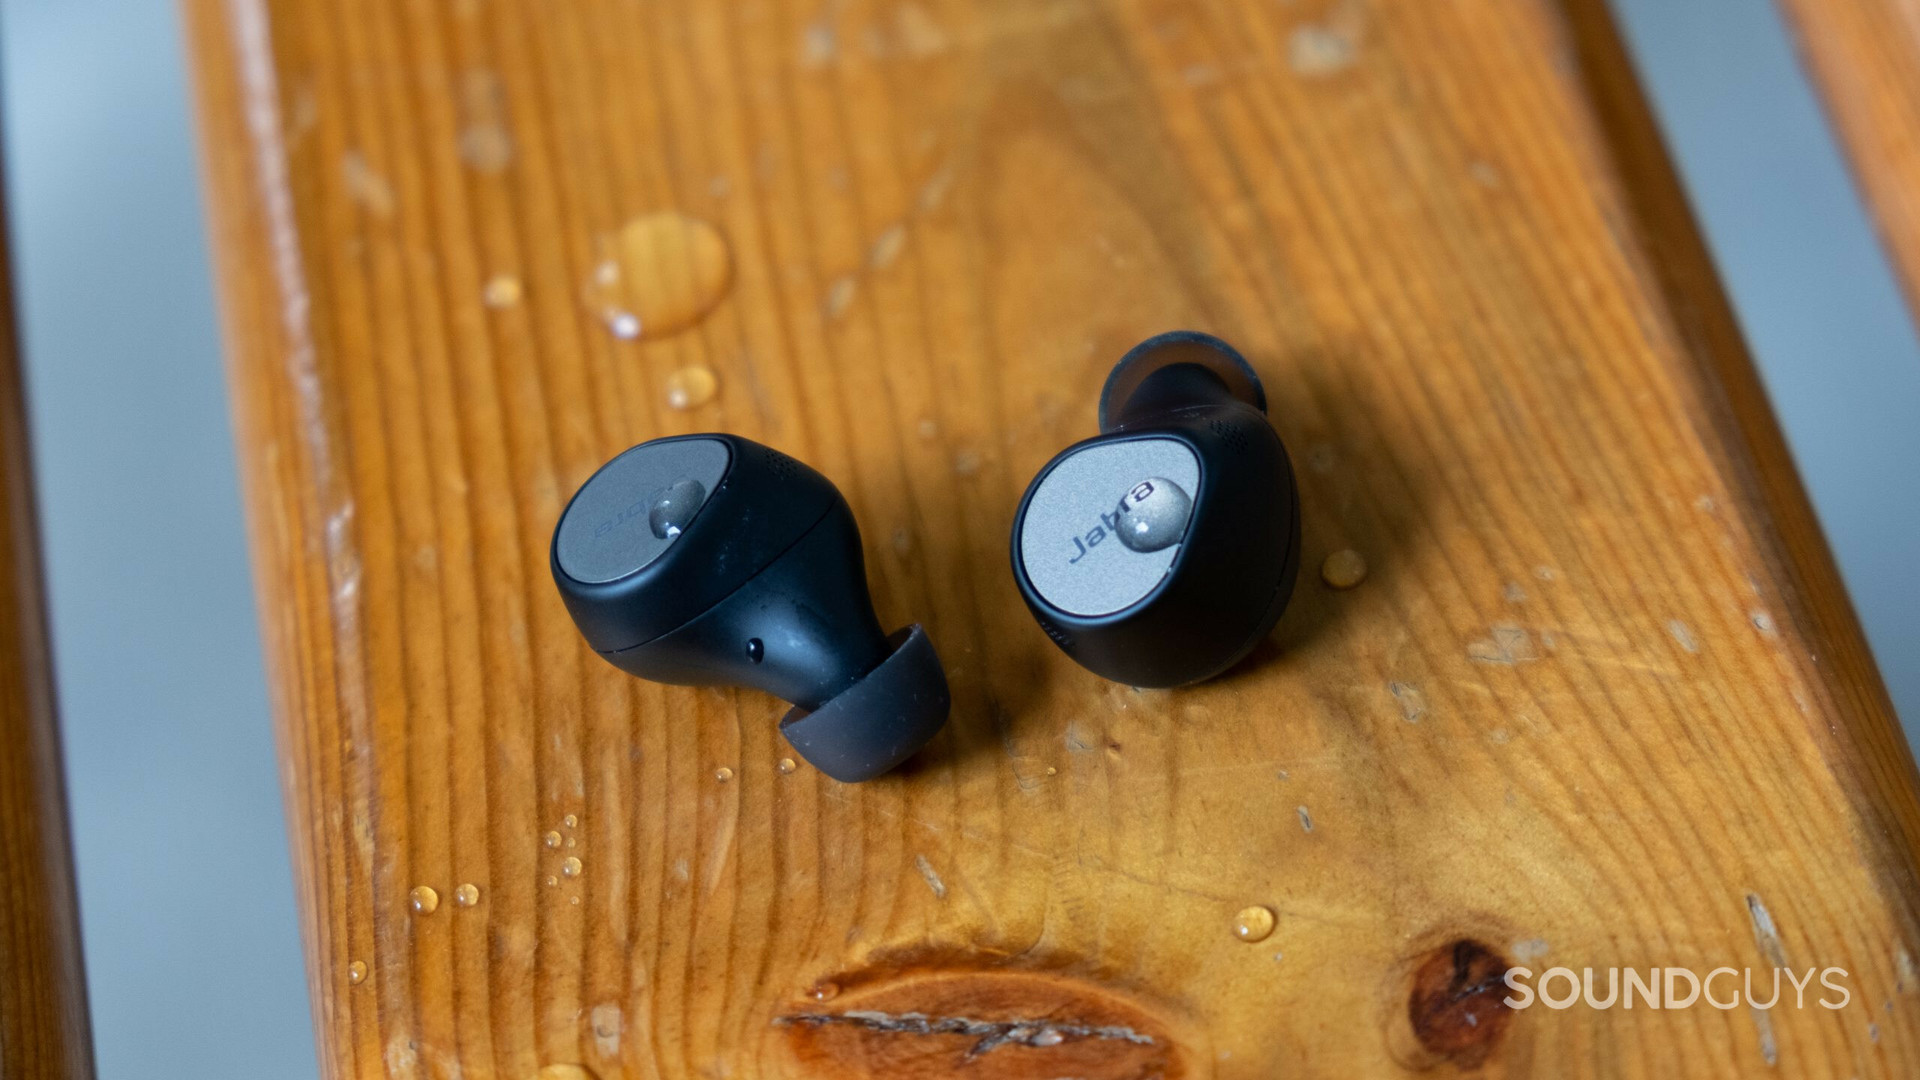 The Jabra Elite 7 Pro earbuds sitting on a bench with some water dropson the buds and the bench.